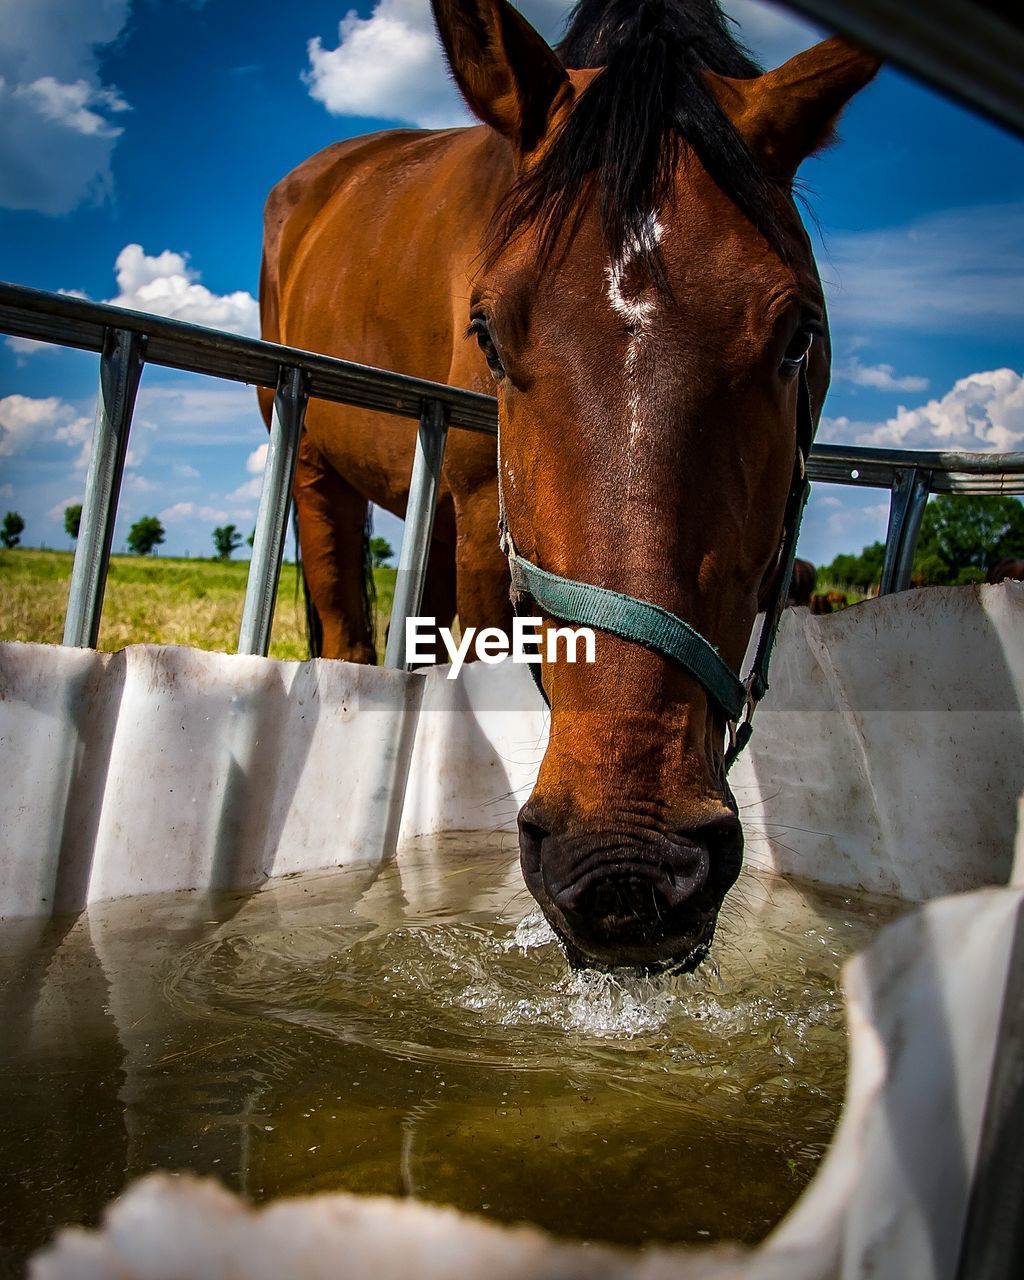 CLOSE-UP OF HORSE DRINKING WATER IN BACKGROUND